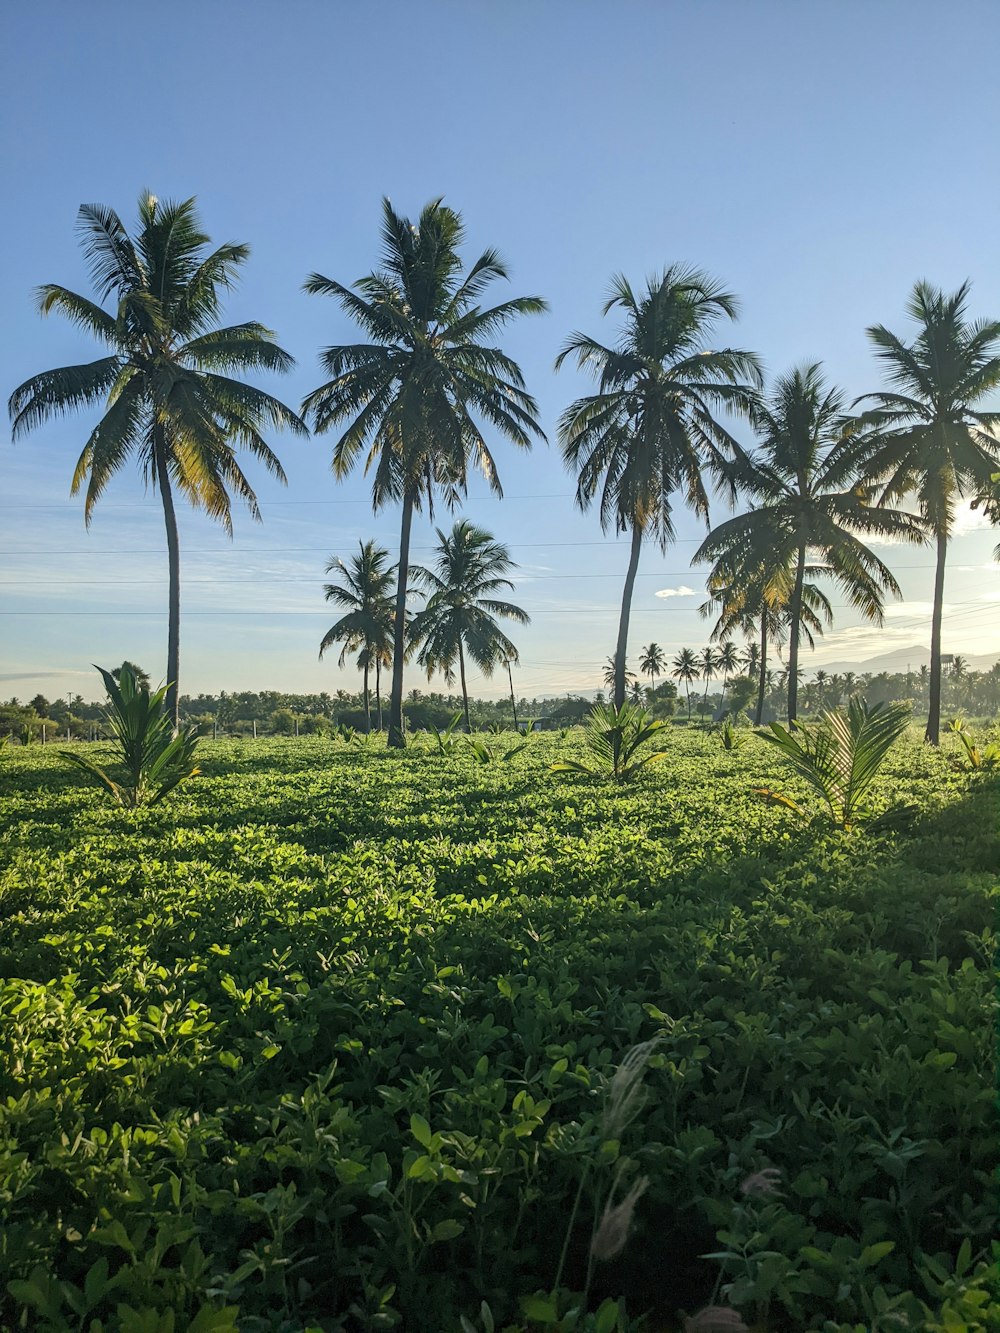 a lush green field with palm trees in the background